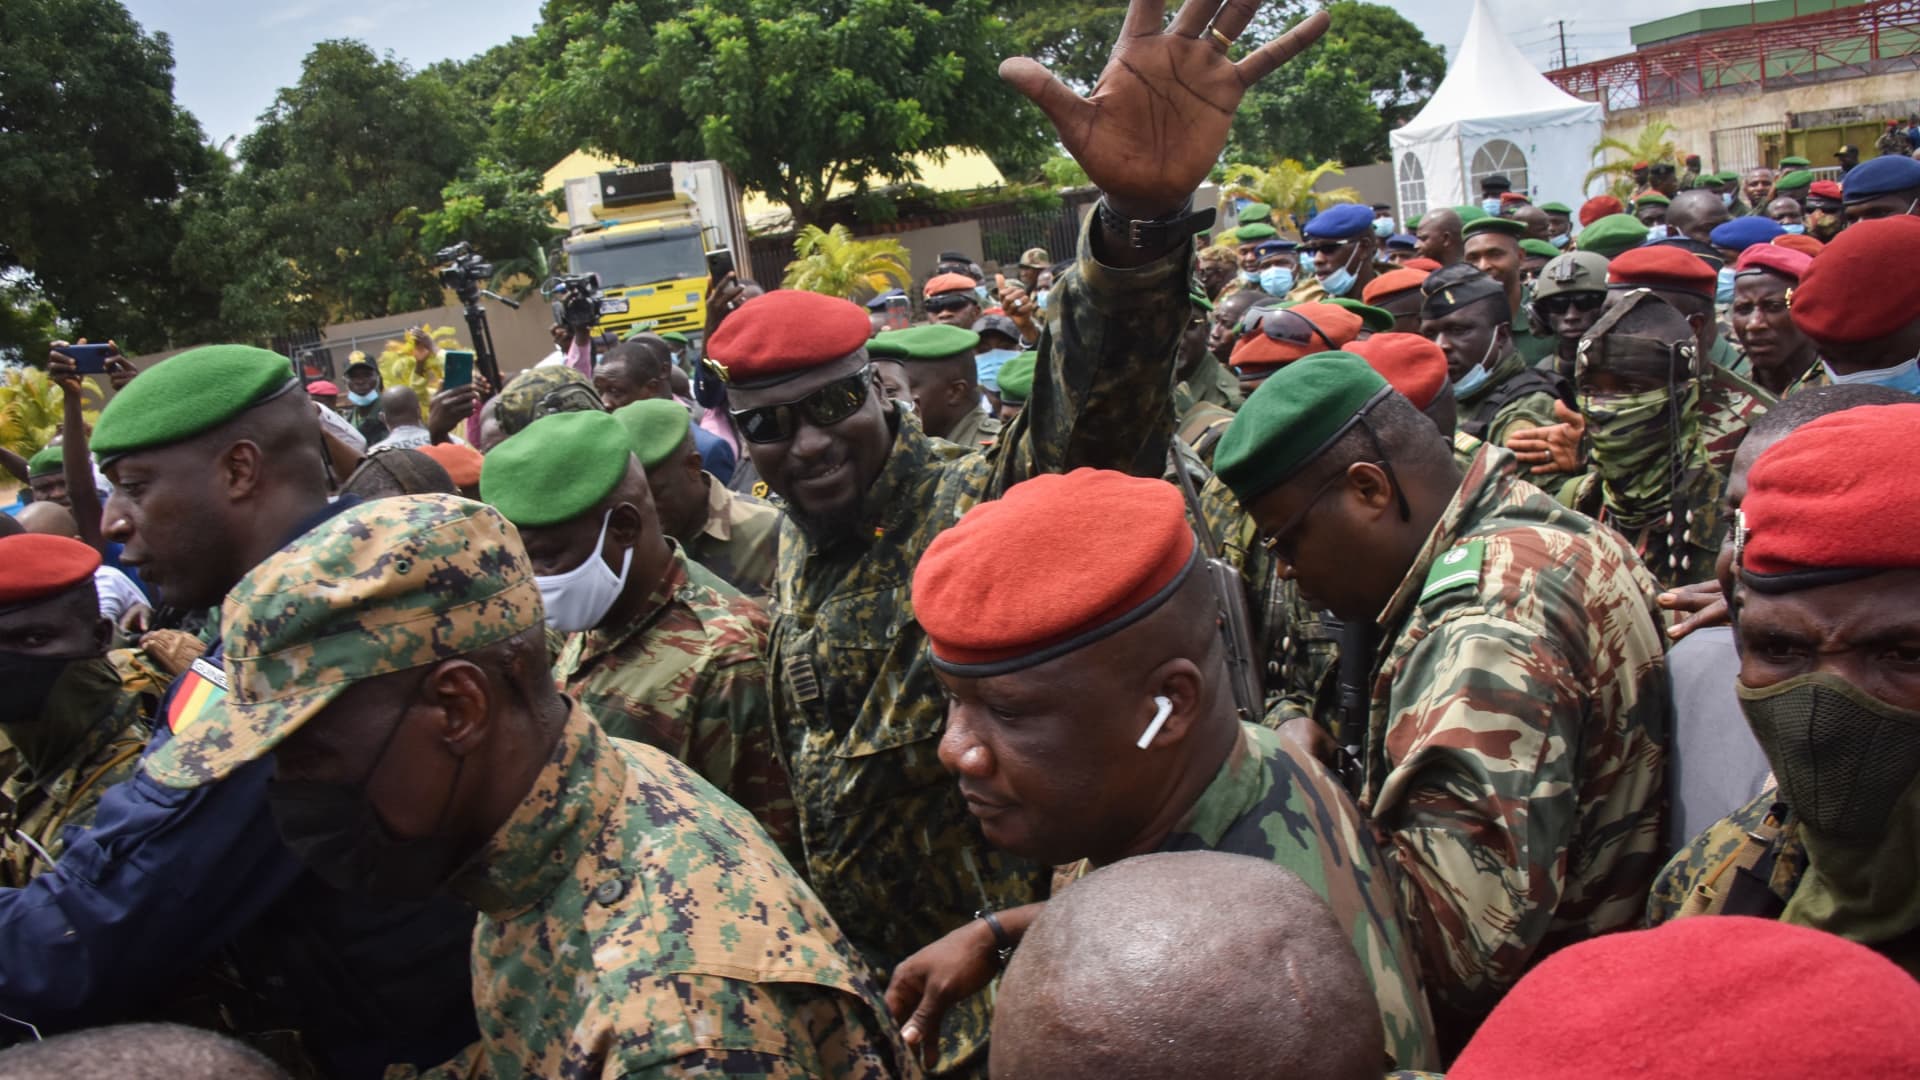 CONAKRY, Guinea - Lieutenant Colonel Mamady Doumbouya, head of the army's special forces and coup leader, waves to the crowd as he arrives at the Palace of the People in Conakry on September 6, 2021, ahead of a meeting with the Ministers of the Ex-President of Guinea, Alpha Conde.